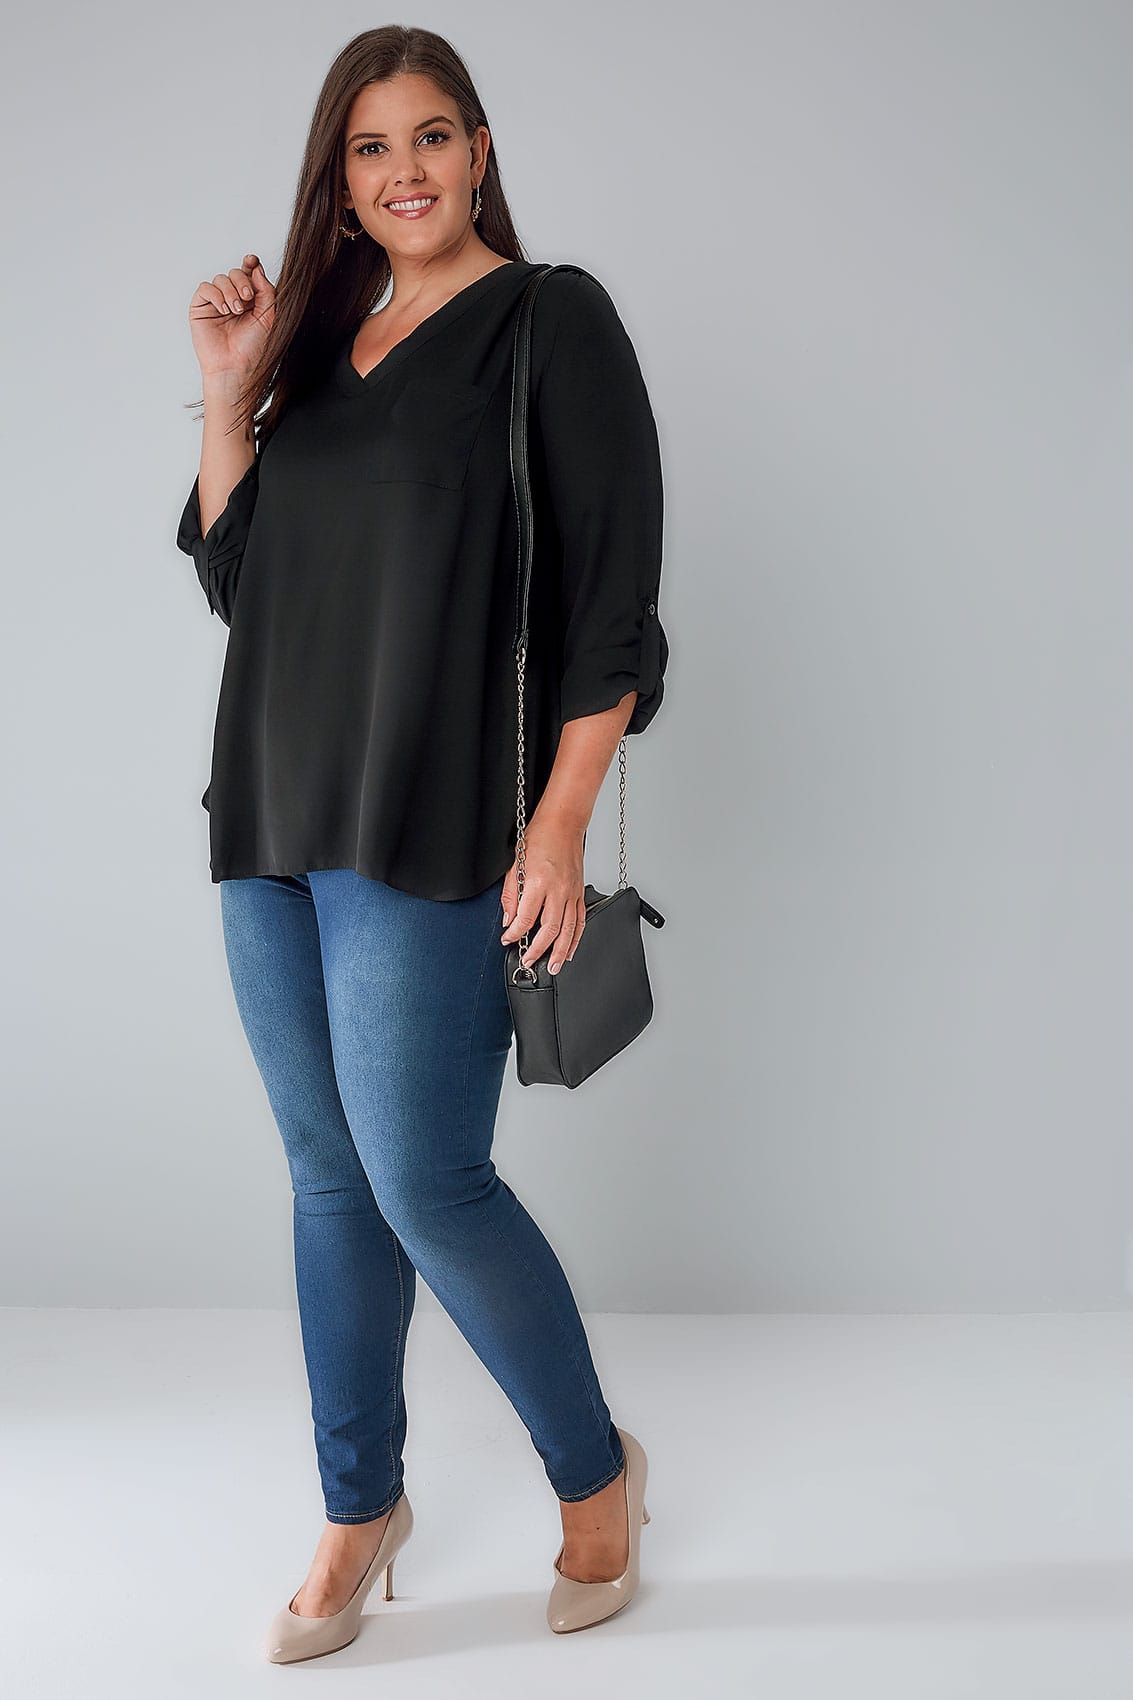 Black V-Neck Blouse With Roll Up Sleeves & Pocket Detail, Plus Size 16 ...